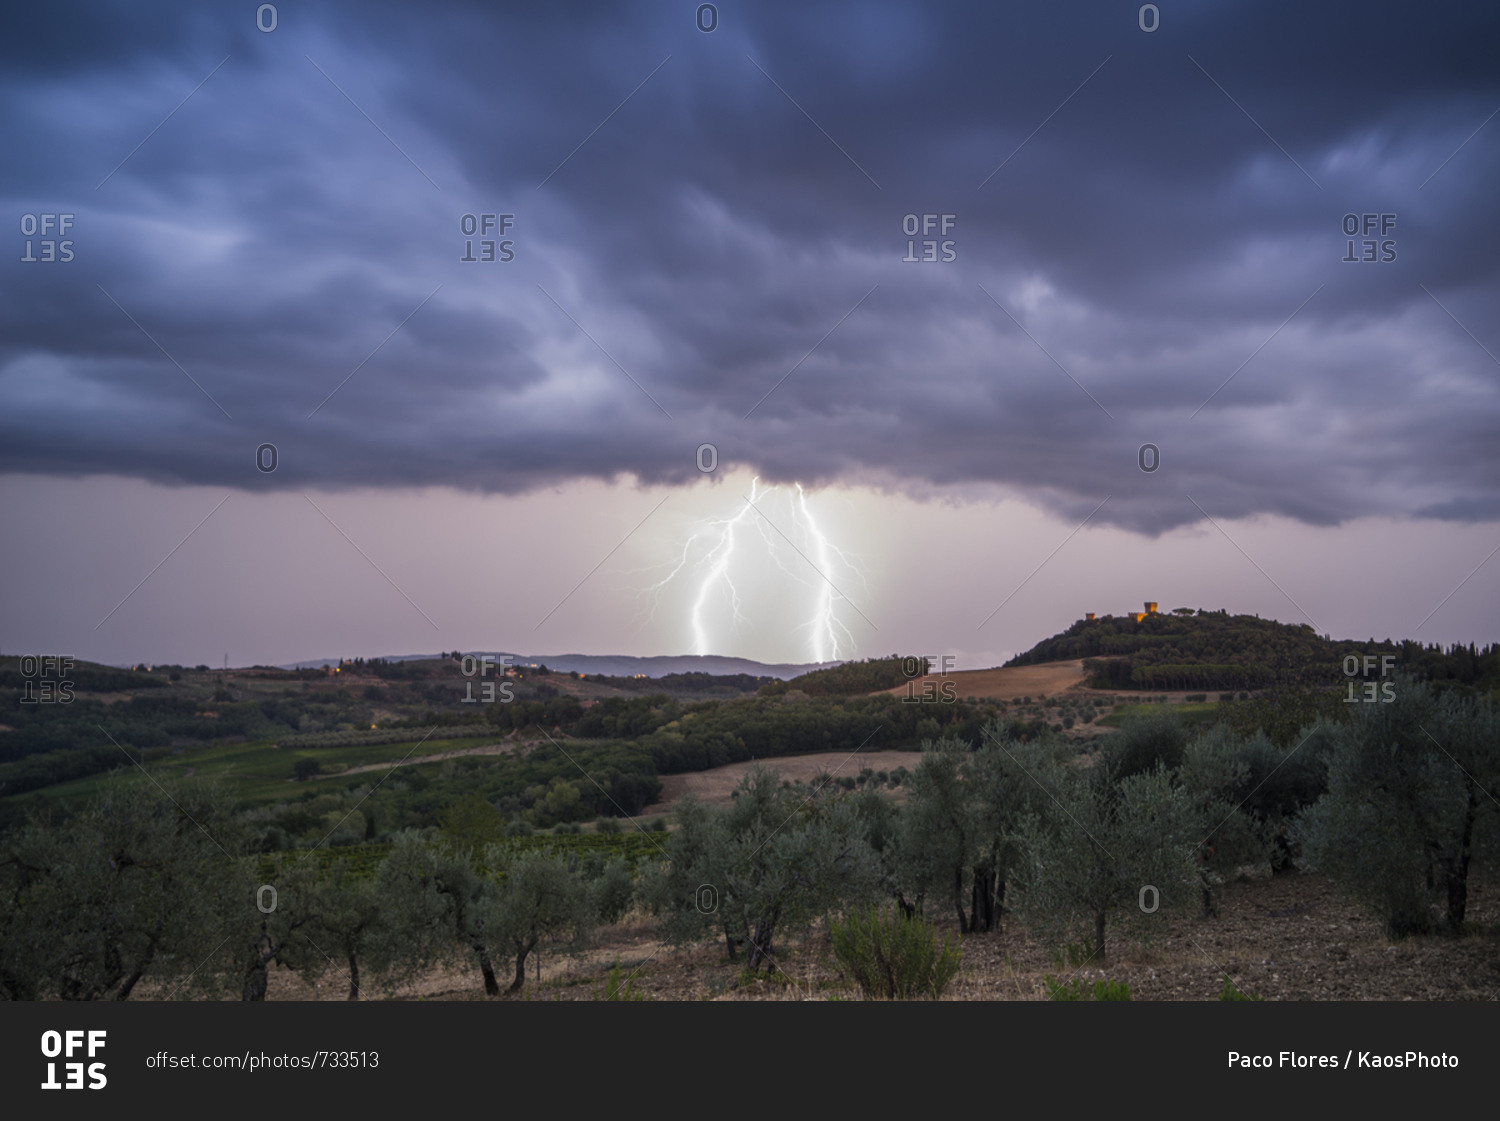 Italy, Tuscany, Certaldo . storm above Santa Maria Novella Castle. Certaldo is a town and comune of Tuscany, Italy, in the Metropolitan City of Florence, in the middle of Valdelsa. It is about 35 kilometers (22 mi) southwest of the Florence Duomo. It was 